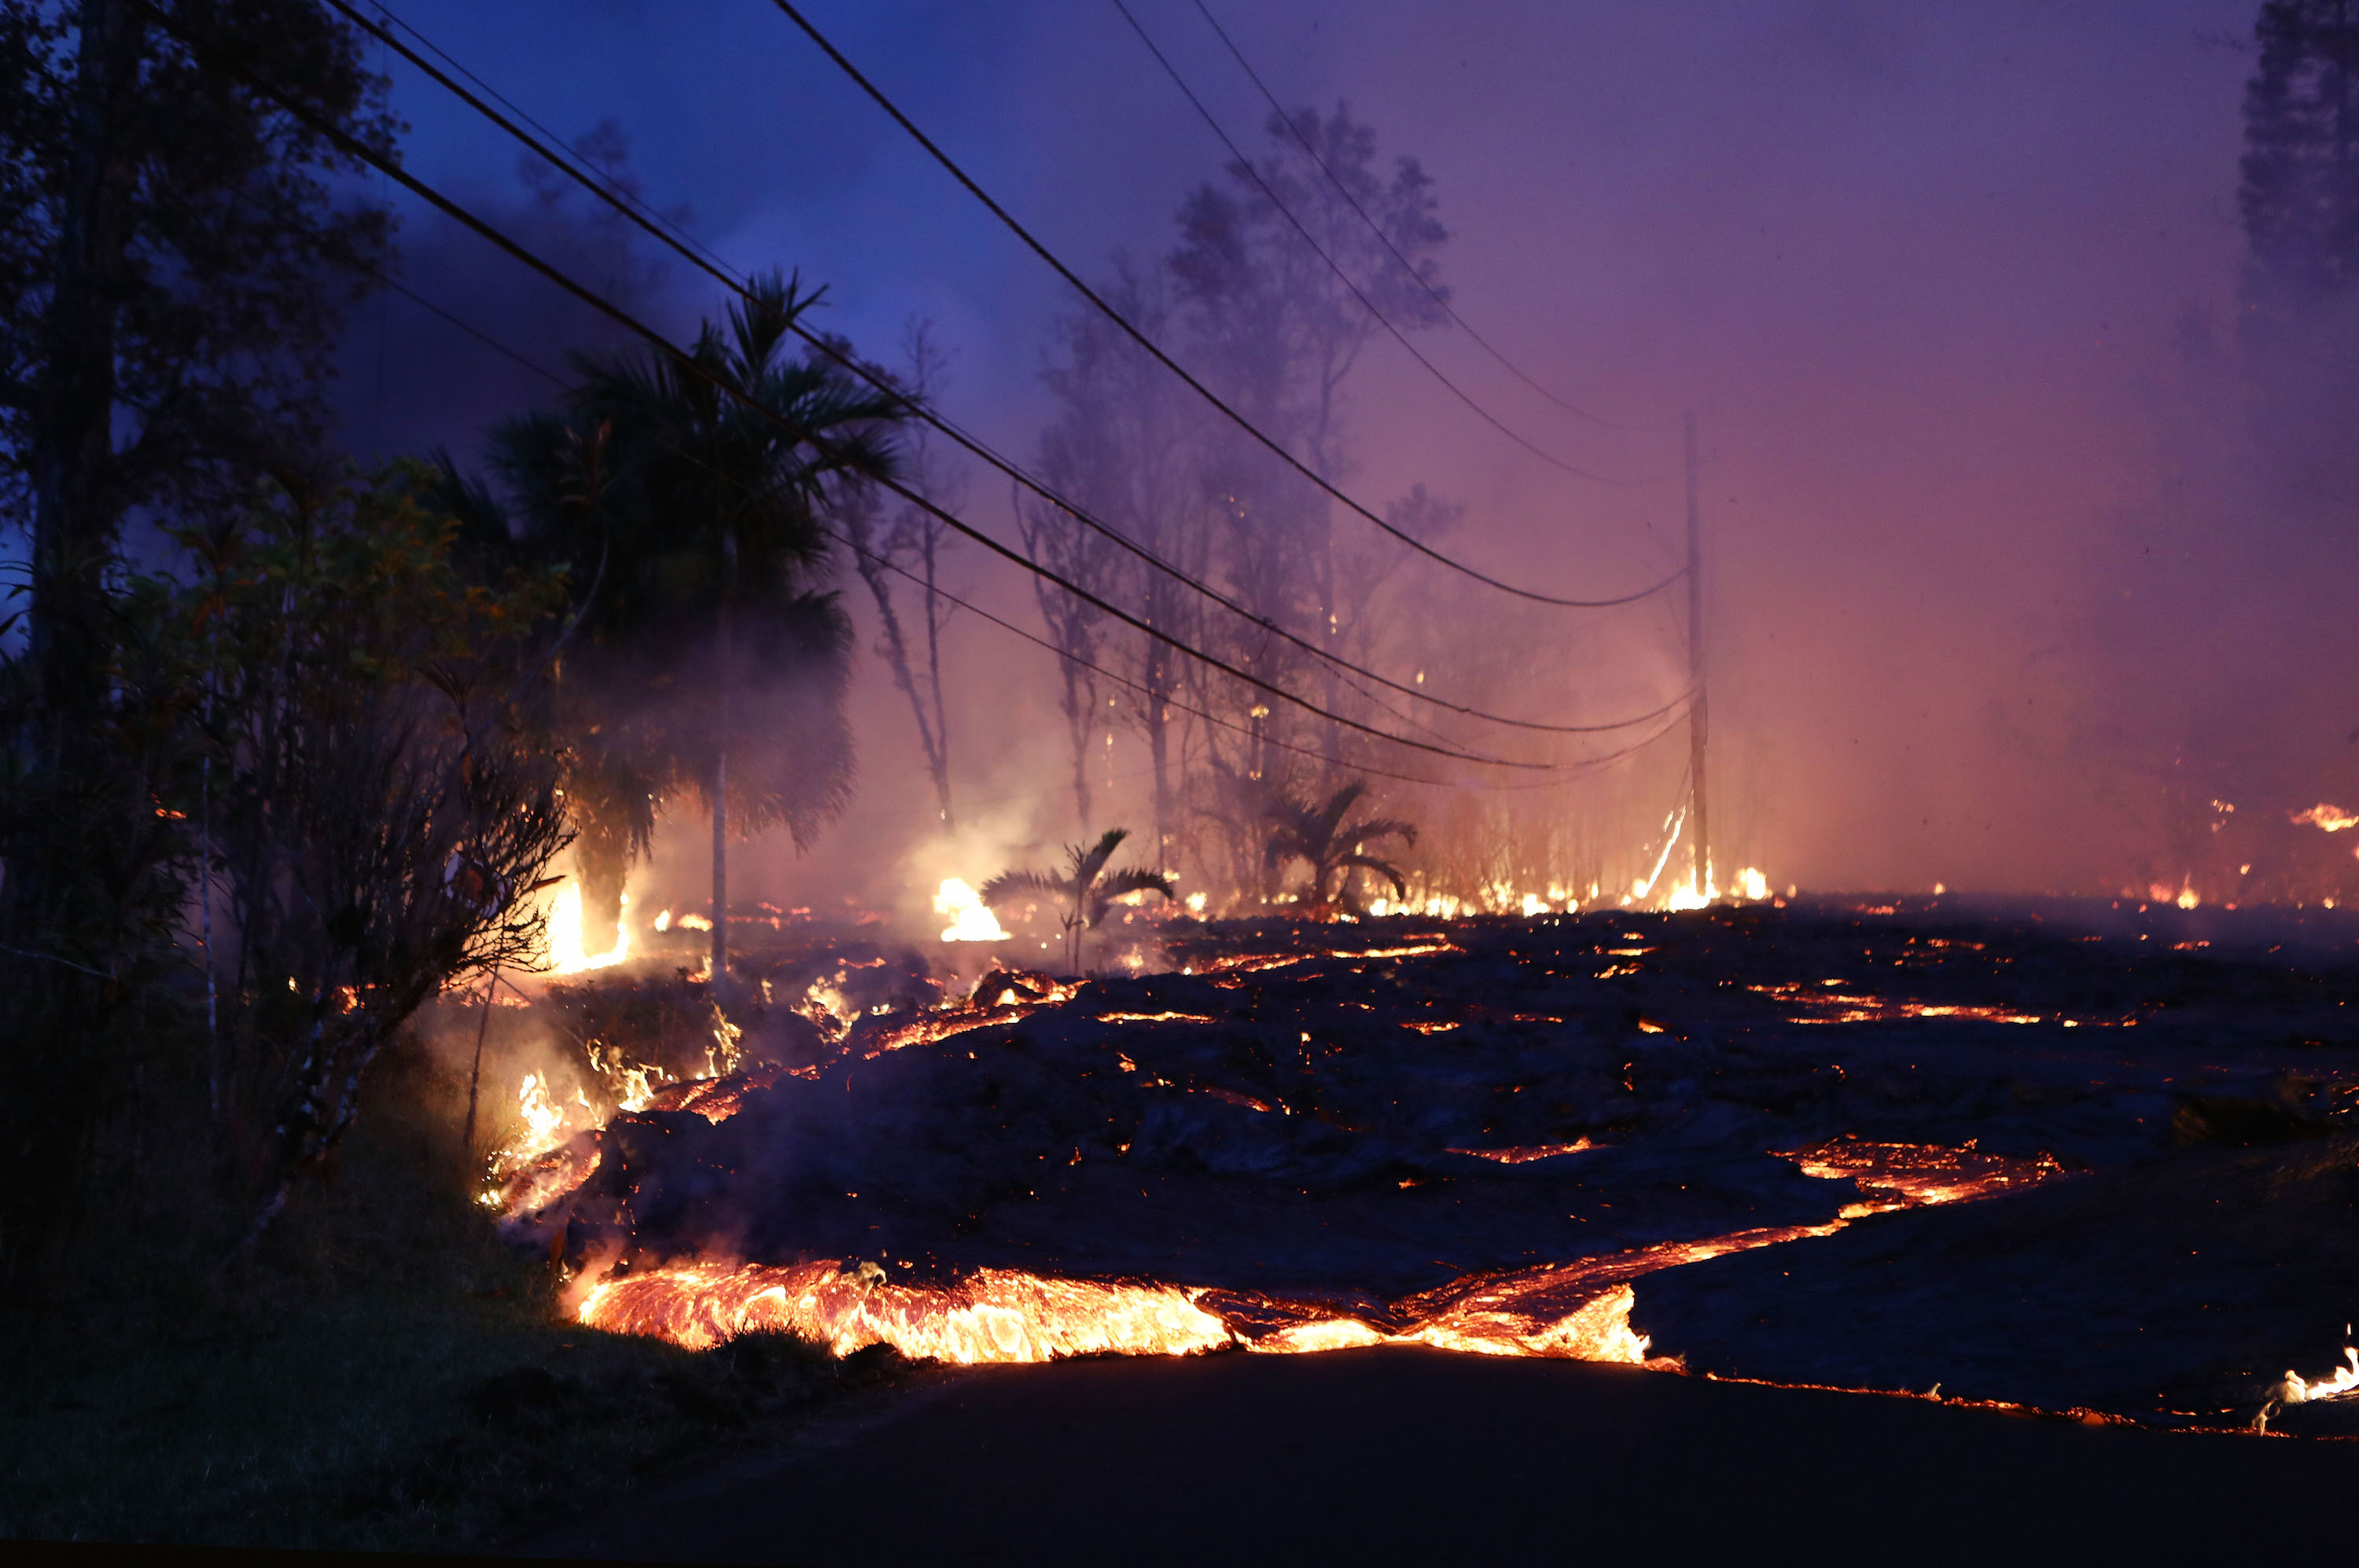 Lava from a Kilauea volcano fissure advances up a residential street in Leilani Estates, on Hawaii's Big Island, on May 27, 2018 in Pahoa, Hawaii. Lava also flowed to a geothermal power plant today raising fears that toxic gas could be released if wells are breached by lava. The Big Island, one of eight main islands that make up Hawaii state, is struggling with tourist bookings following the Kilauea volcano eruptions, with summer bookings at the island down 50 percent. Officials stress that the eruptions have thus far only affected a small portion of the island.  (Photo by Mario Tama/Getty Images)